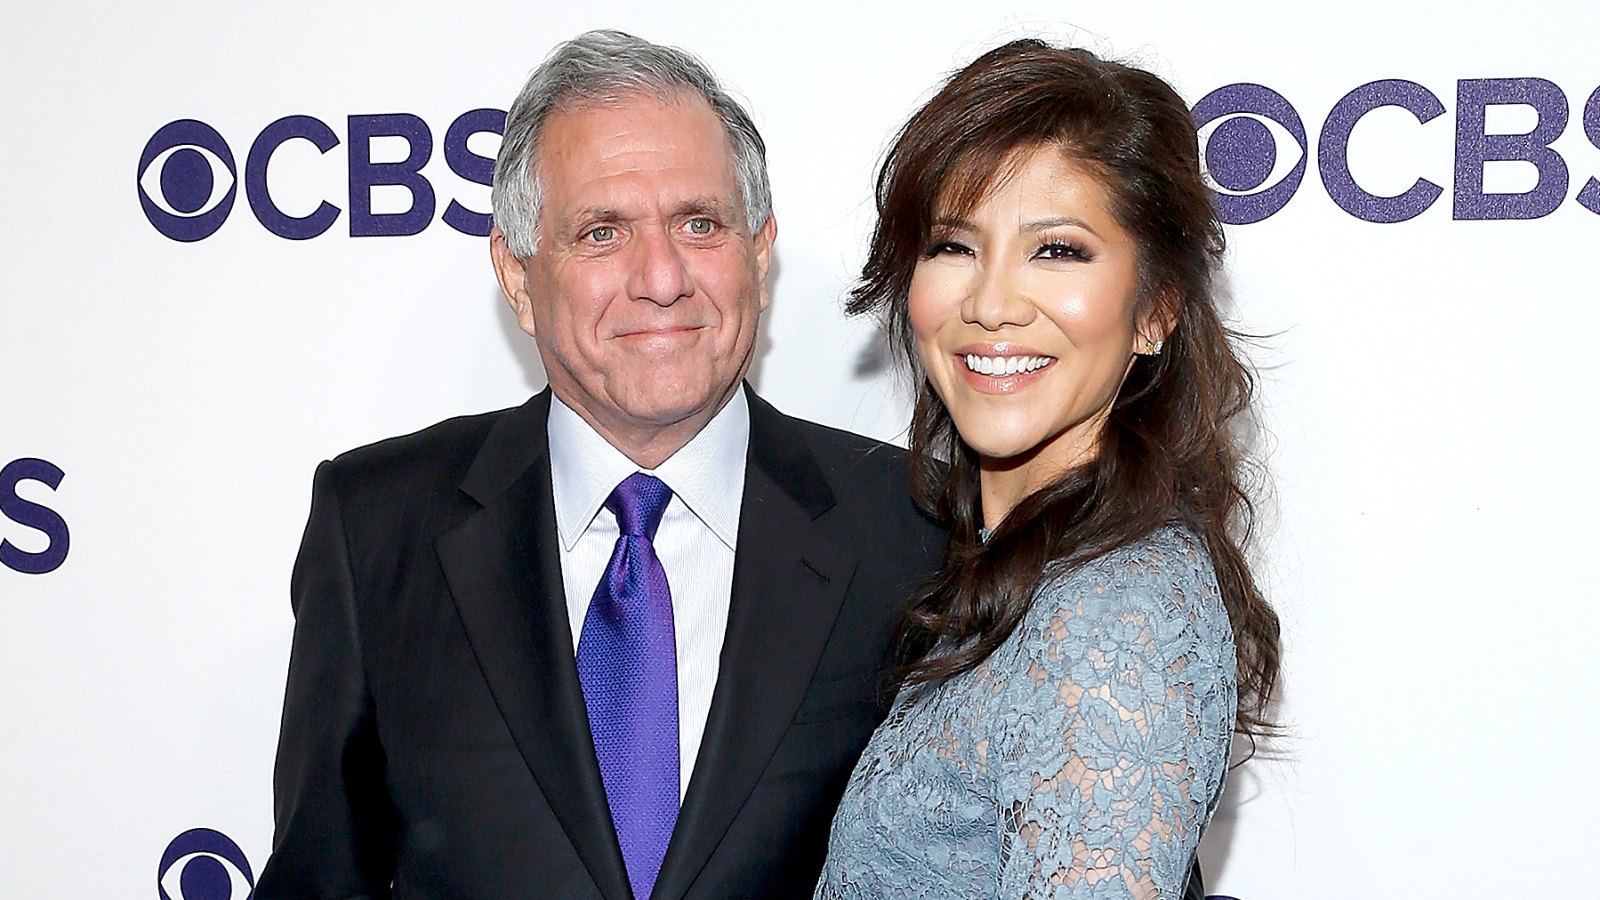 Leslie Moonves and Julie Chen attend the CBS Upfront at The Plaza Hotel in New York City on May 17, 2017.